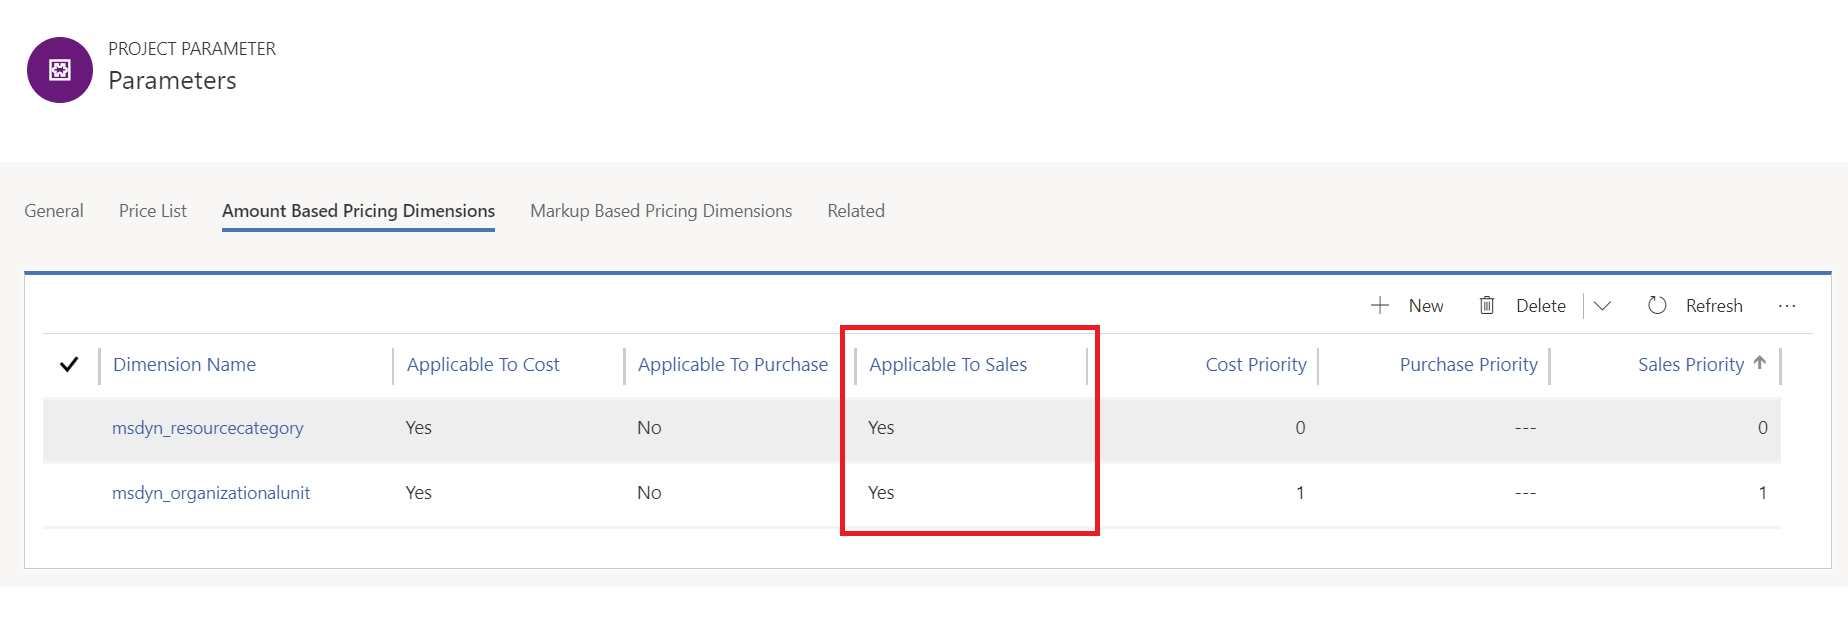 Screenshot of Project Service parameters with “Applicable to Sales” highlighted.